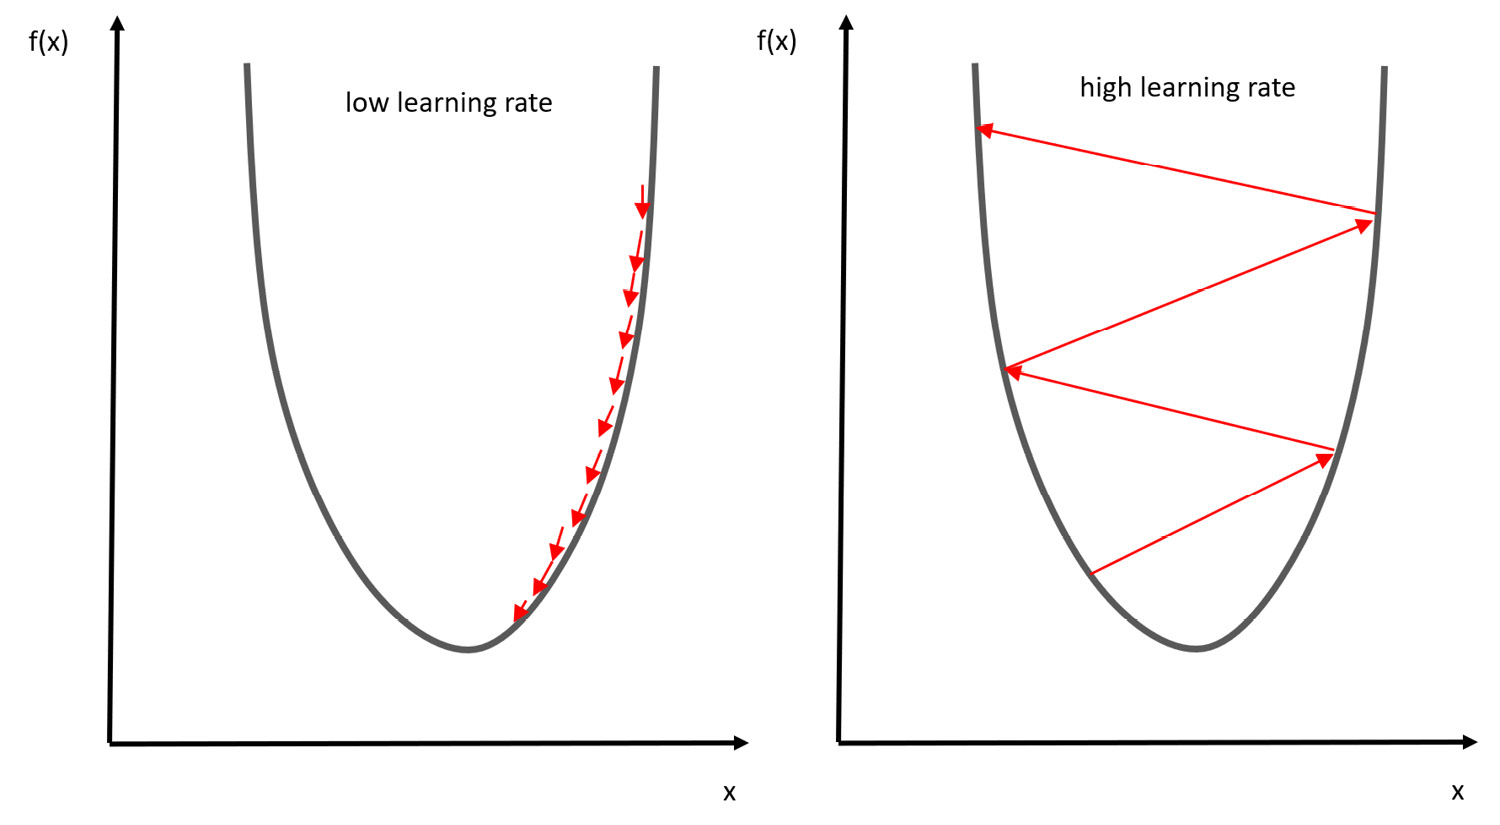 Figure 7.3 – Scenarios for the learning rate
